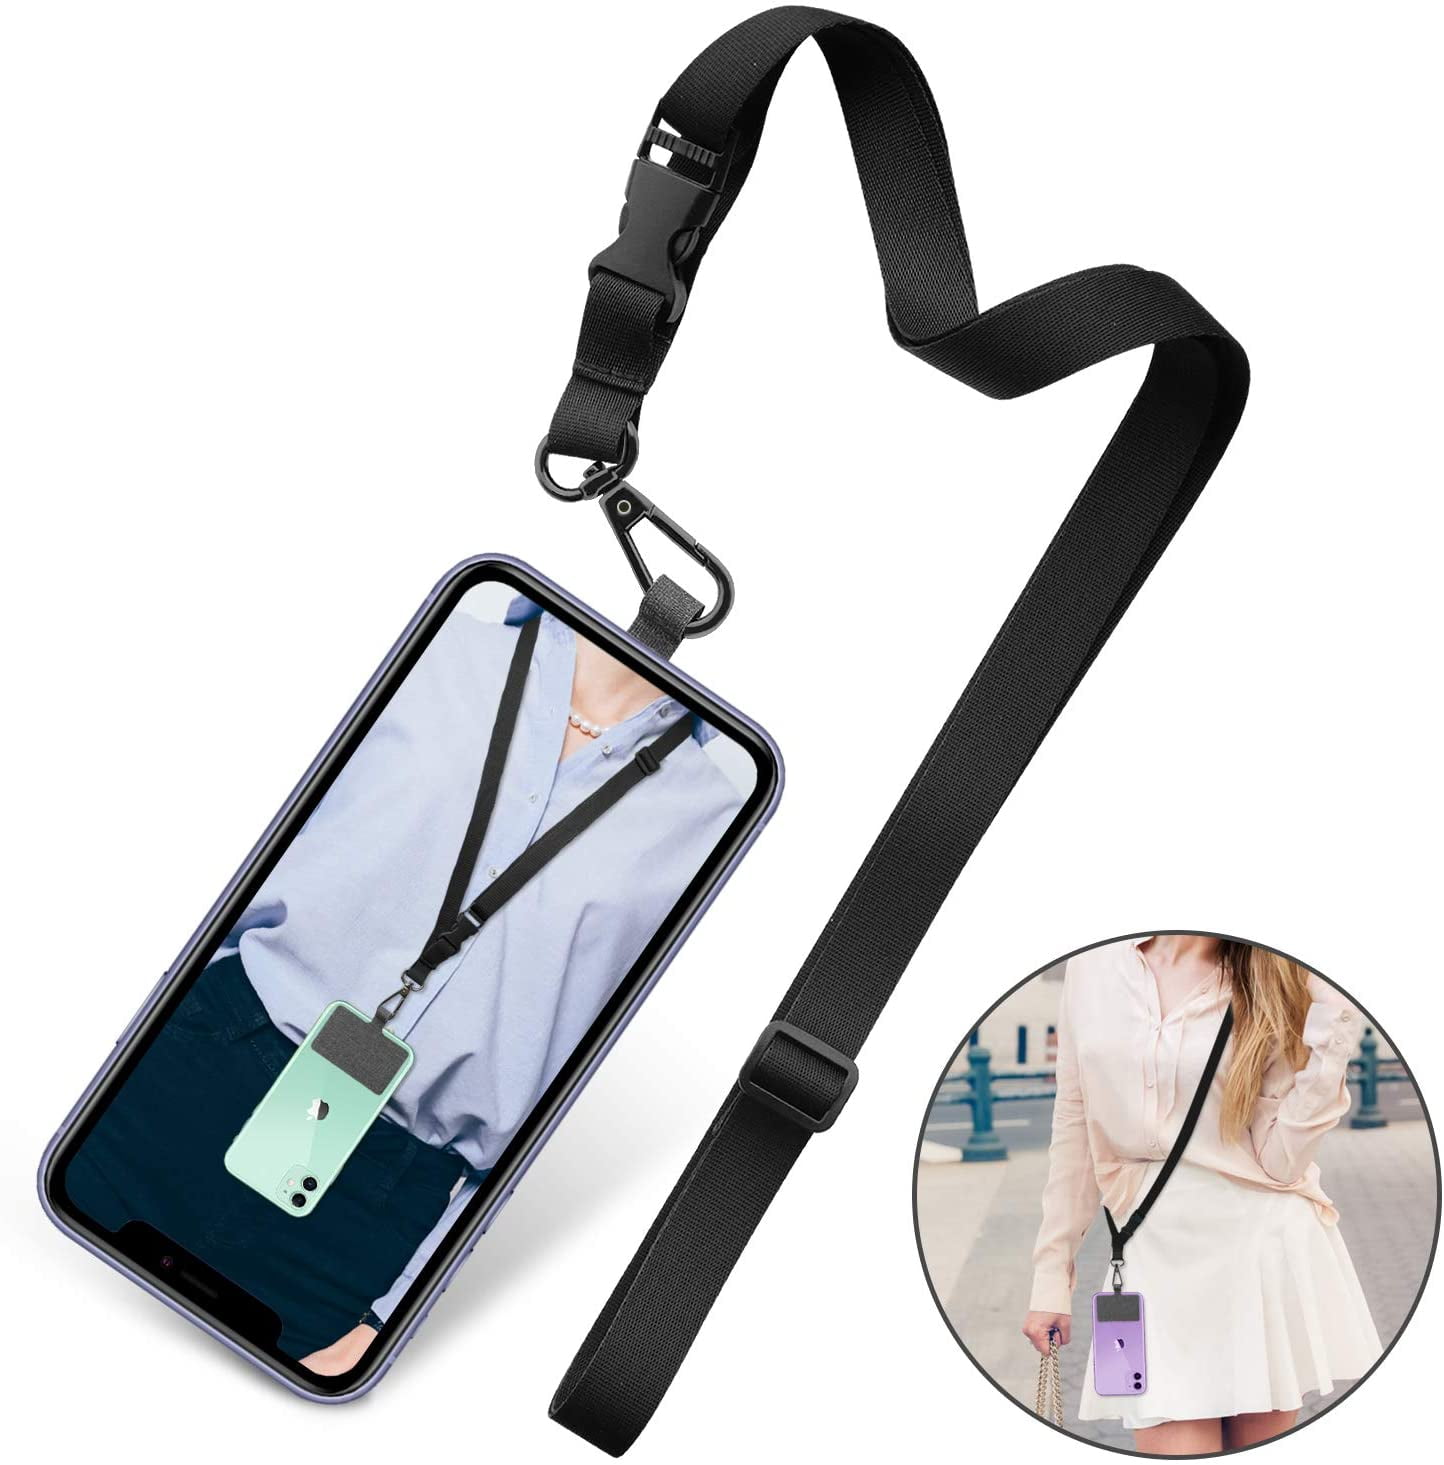 Gray UKON Phone Lanyard,Universal Cell Phone Neck Strap Wrist Strap Nylon Material Removable Phone Tether Charms Keychain with Patch Compatible with Most Smartphone Cases 